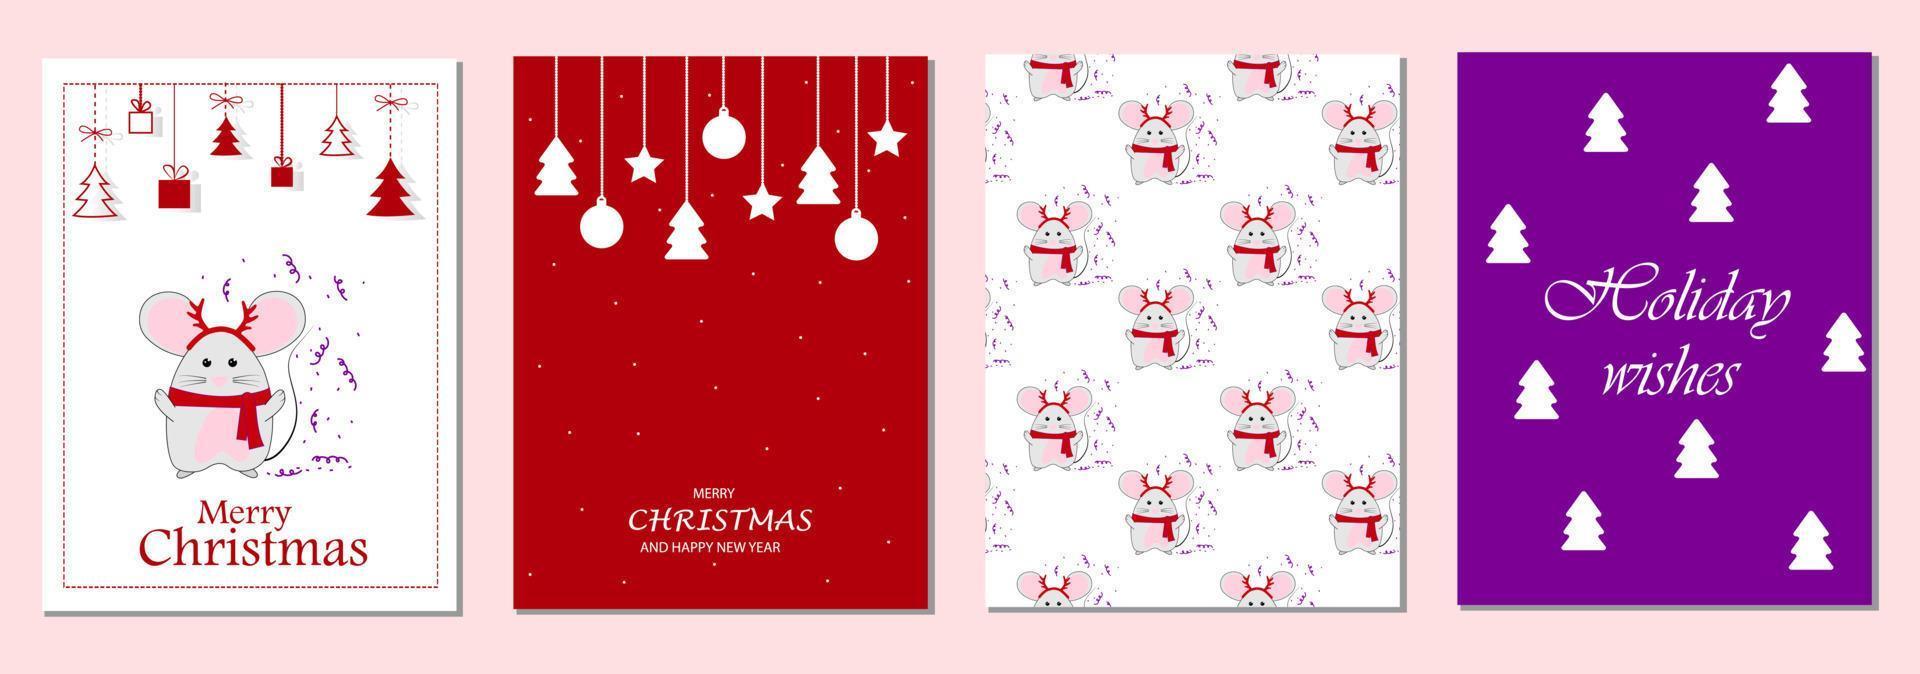 Set of winter holiday greeting cards with mice.Christmas vector illustration